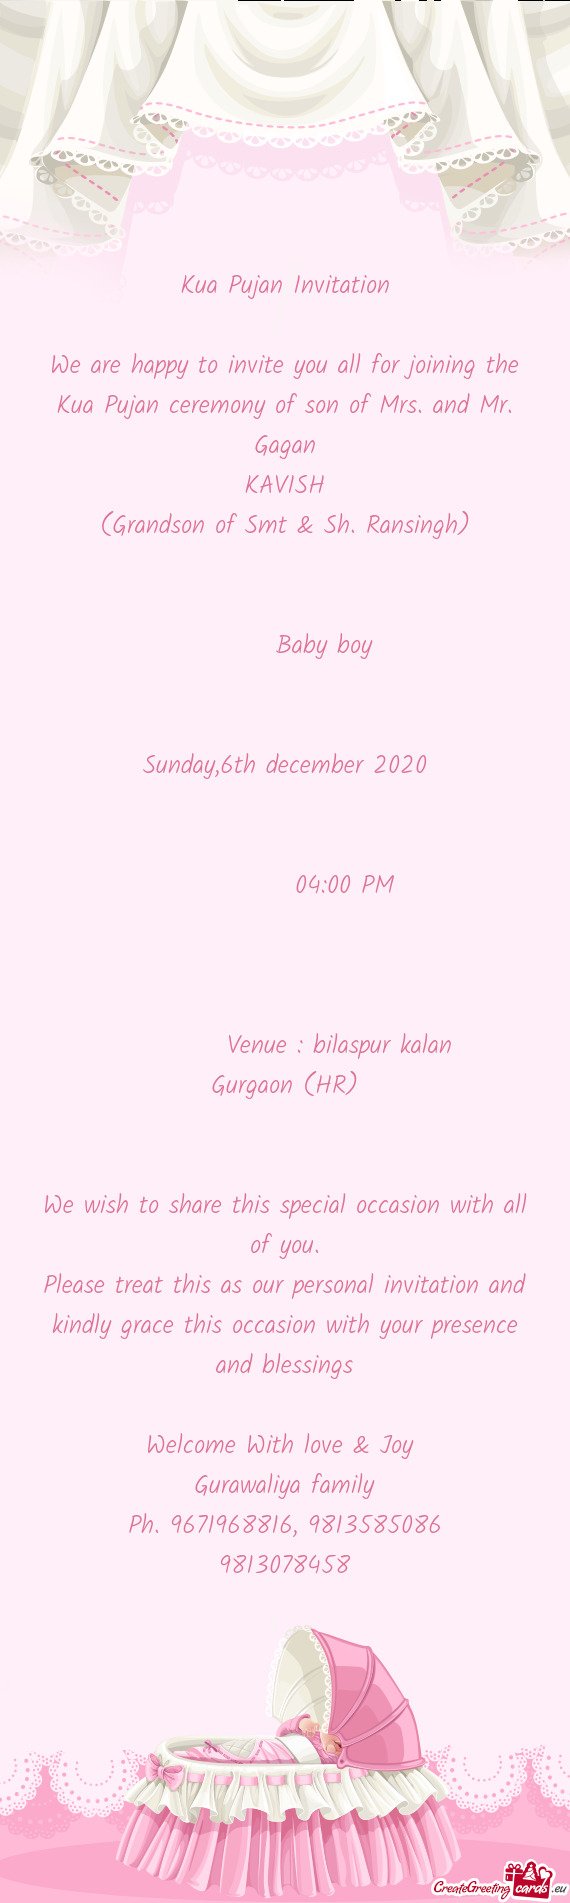 We are happy to invite you all for joining the Kua Pujan ceremony of son of Mrs. and Mr. Gagan